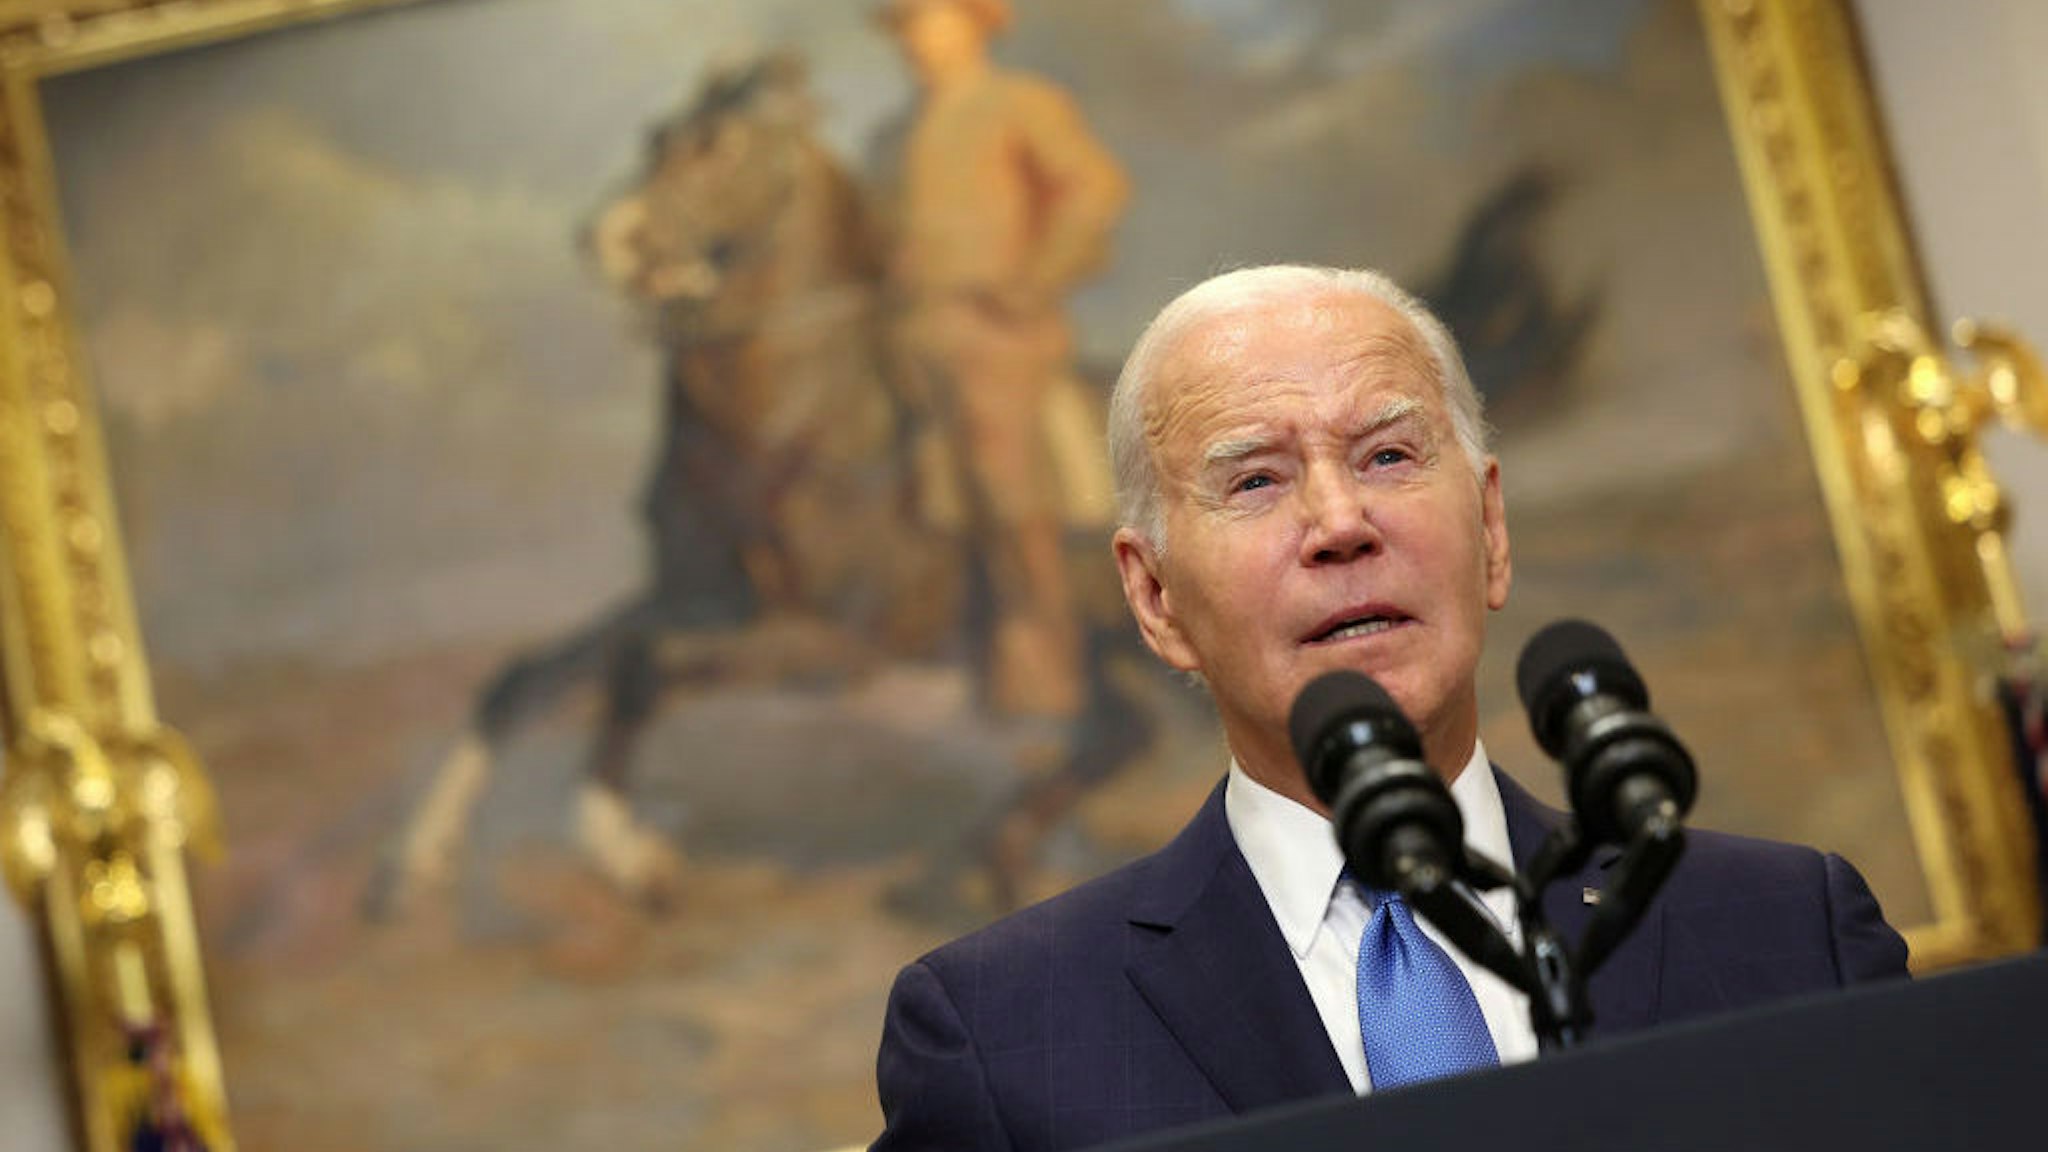 WASHINGTON, DC - SEPTEMBER 15: U.S. President Joe Biden delivers remarks on the contract negotiations between the United Auto Workers and auto companies in the Roosevelt Room at the White House on September 15, 2023 in Washington, DC. The United Auto Workers authorized a strike for the first time since 2019 amid negotiations with Ford, General Motors and Stellantis. (Photo by Kevin Dietsch/Getty Images)